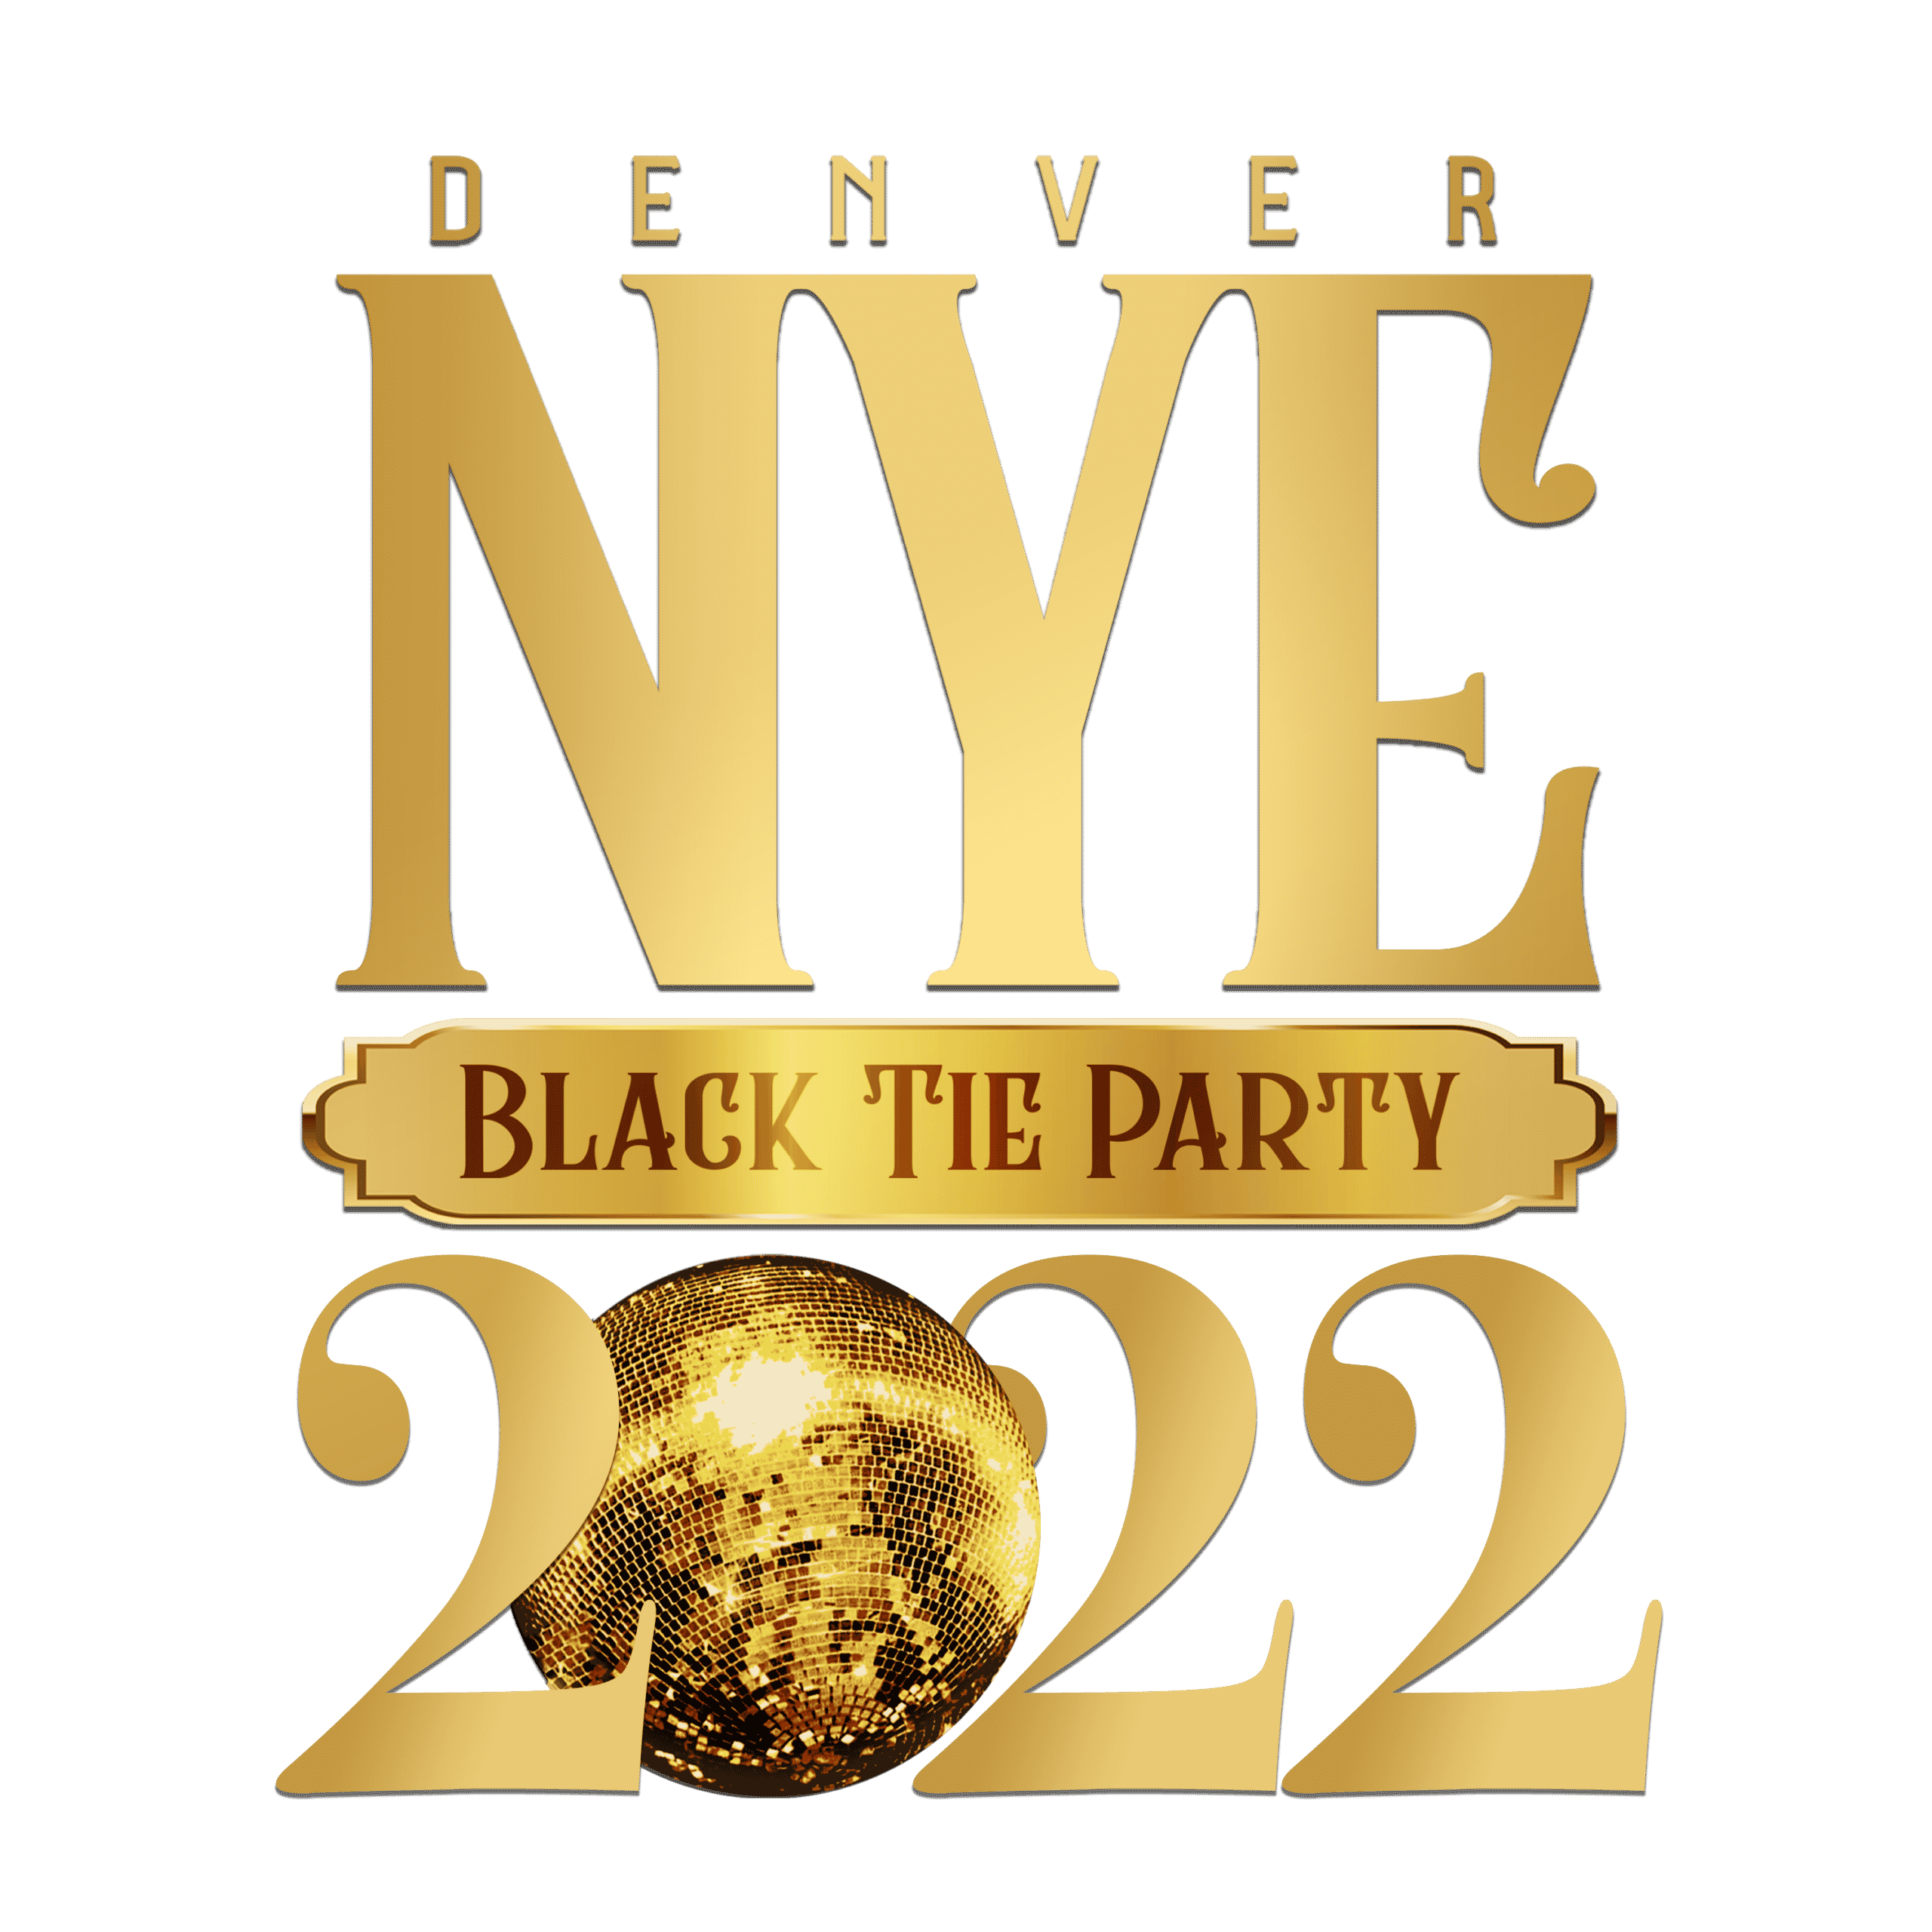 New Years Eve Denver | Denver New Years Eve Black Tie Party 2022 - 2023